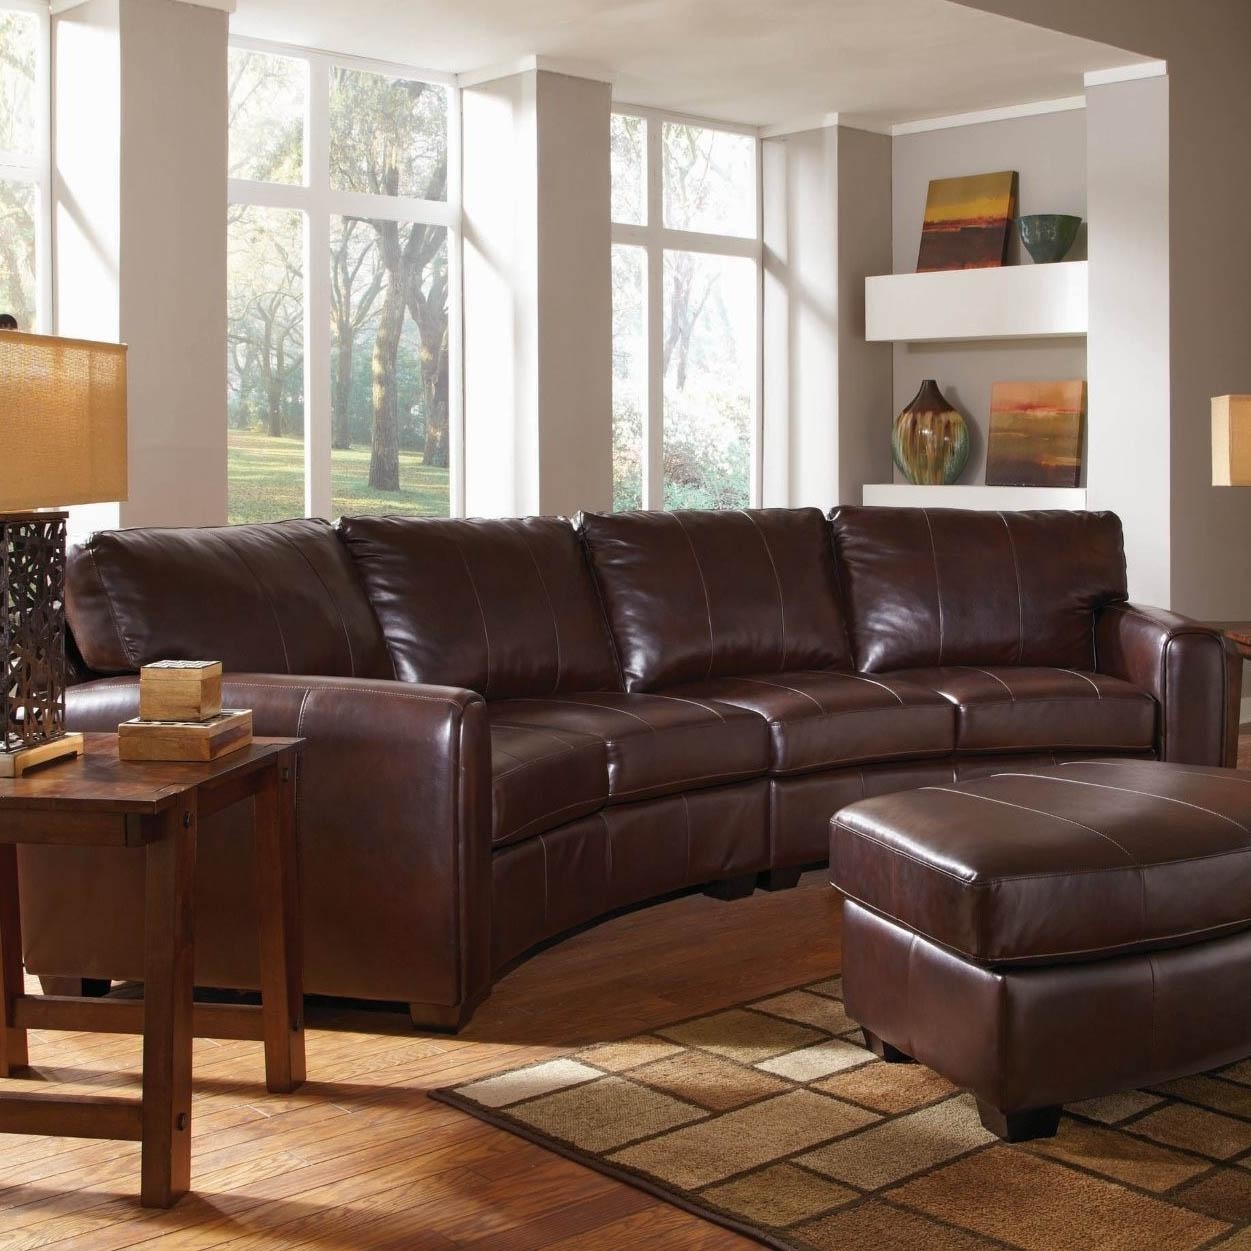 Black leather curved sectional sofa landen contemporary curved leather